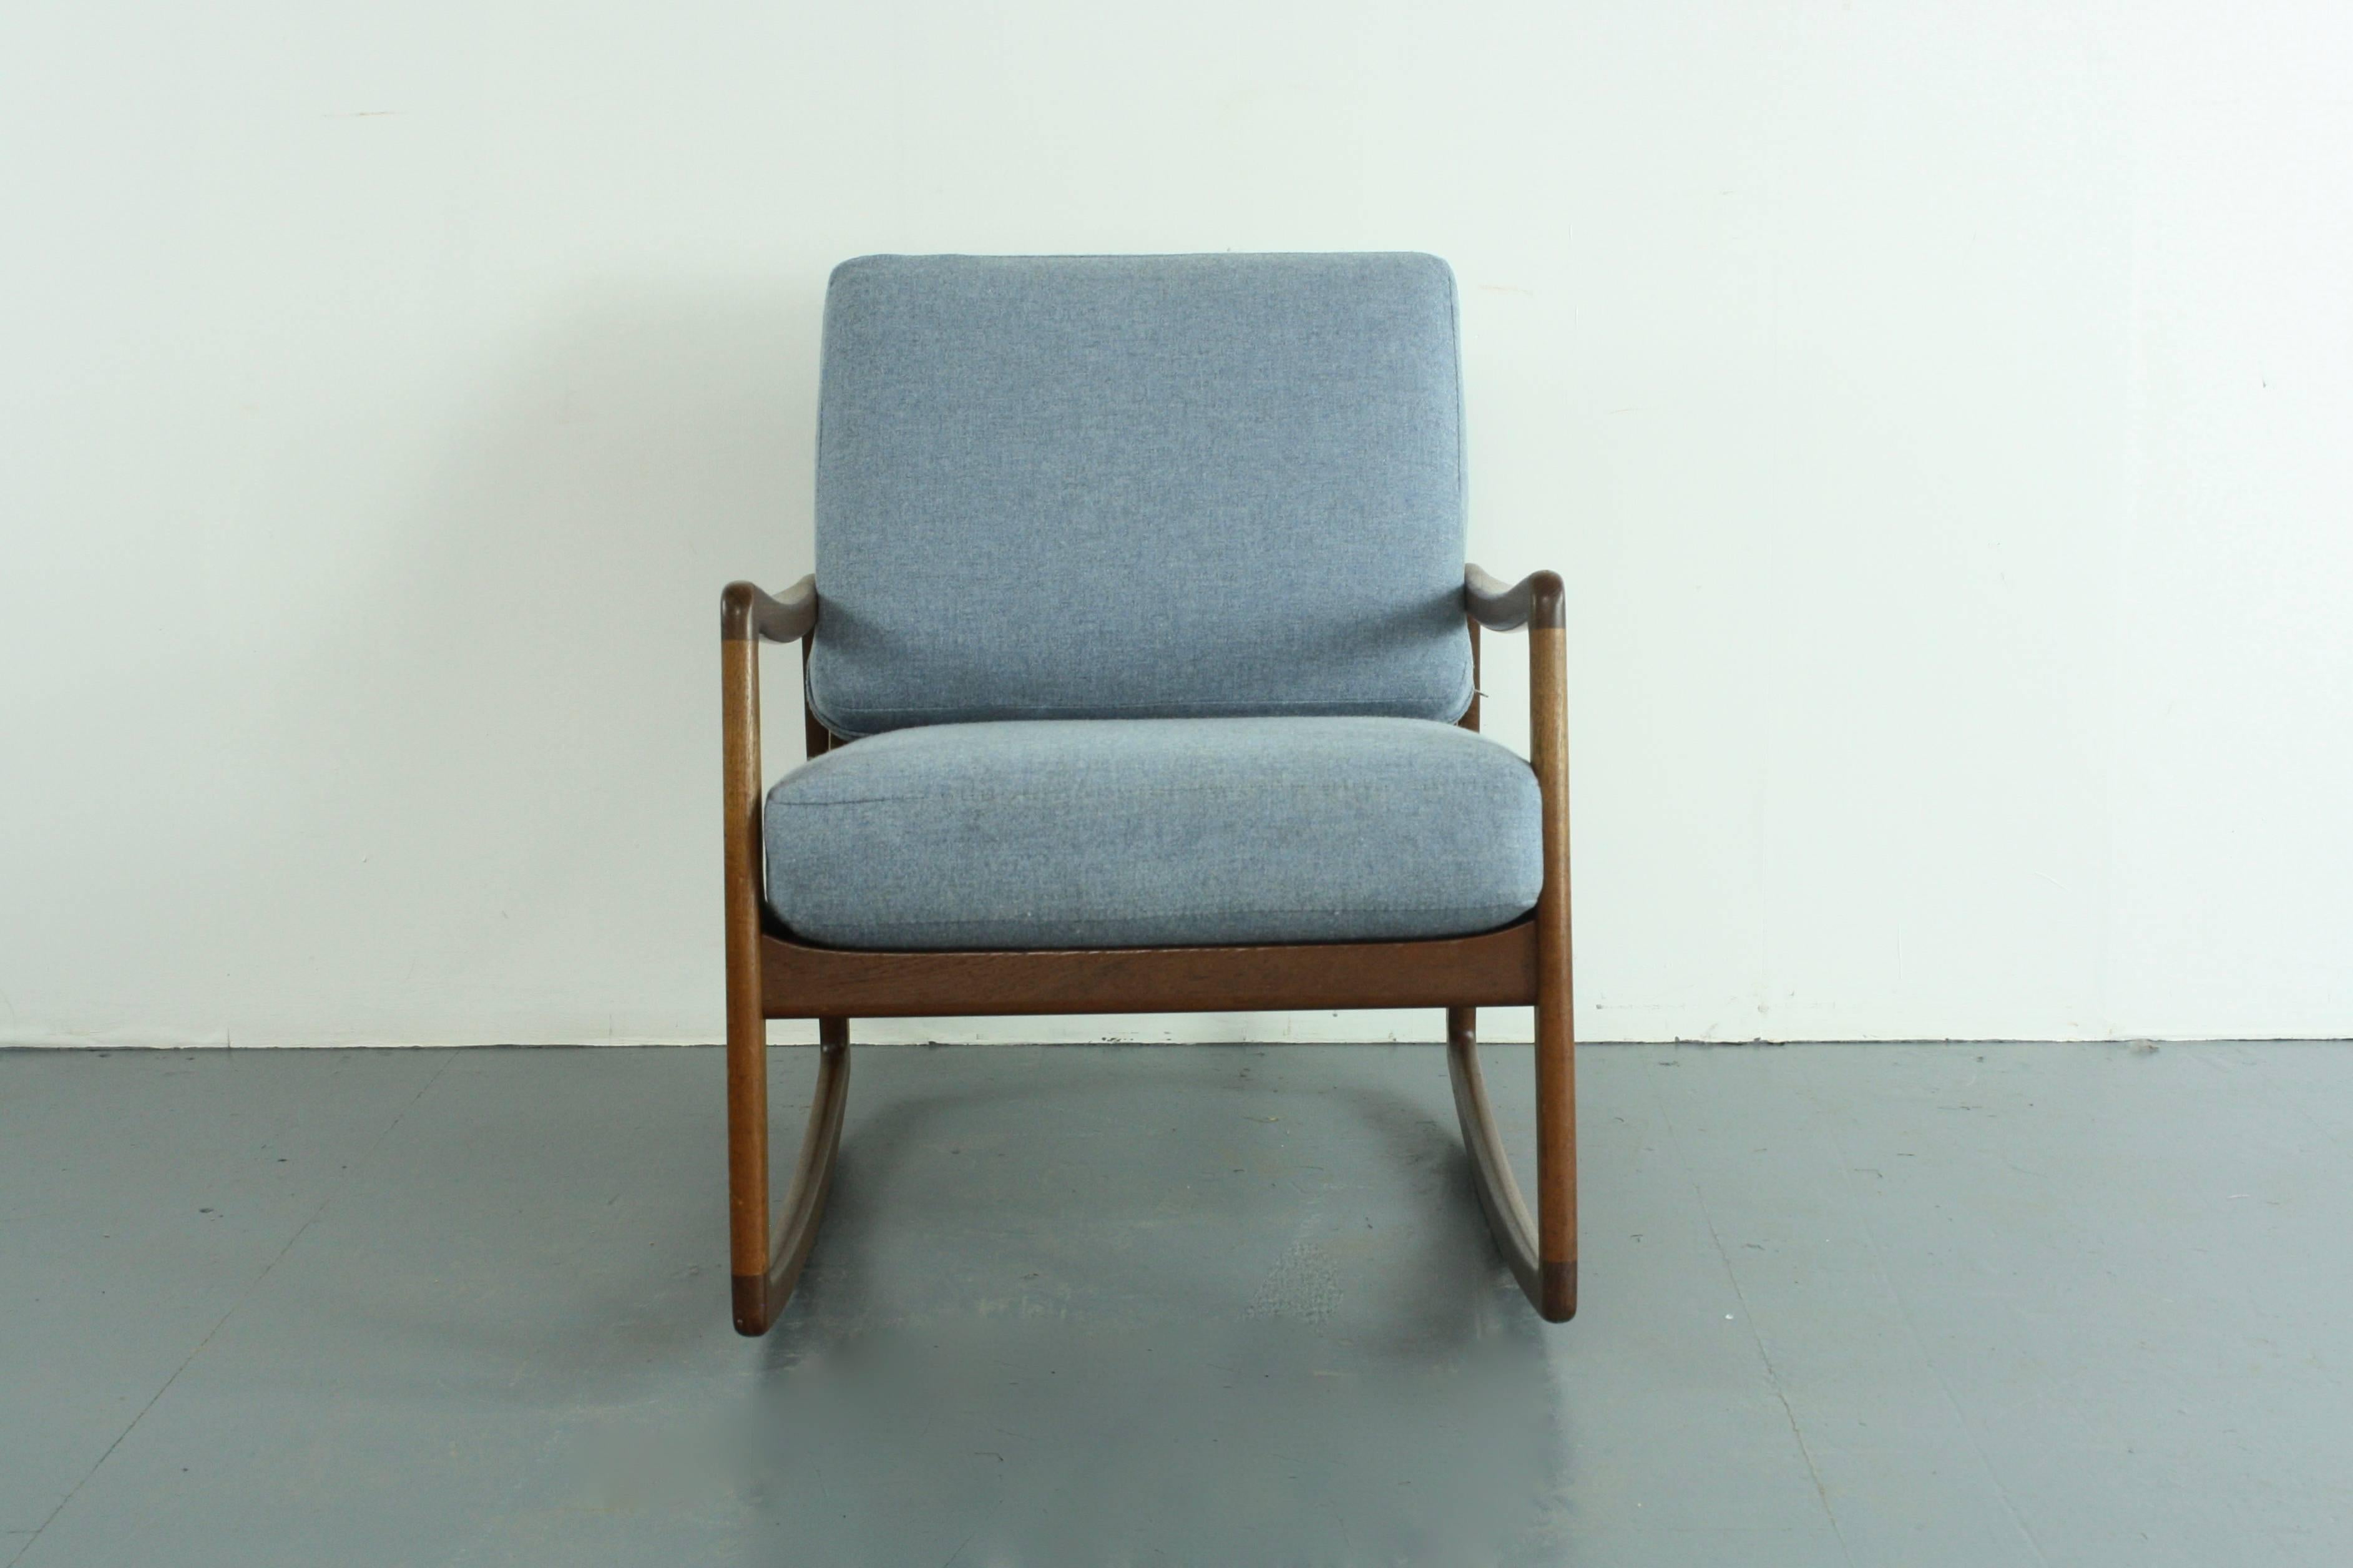 20th Century Vintage Midcentury Teak Rocking Chair by Ole Wanscher for France & Son, Denmark For Sale